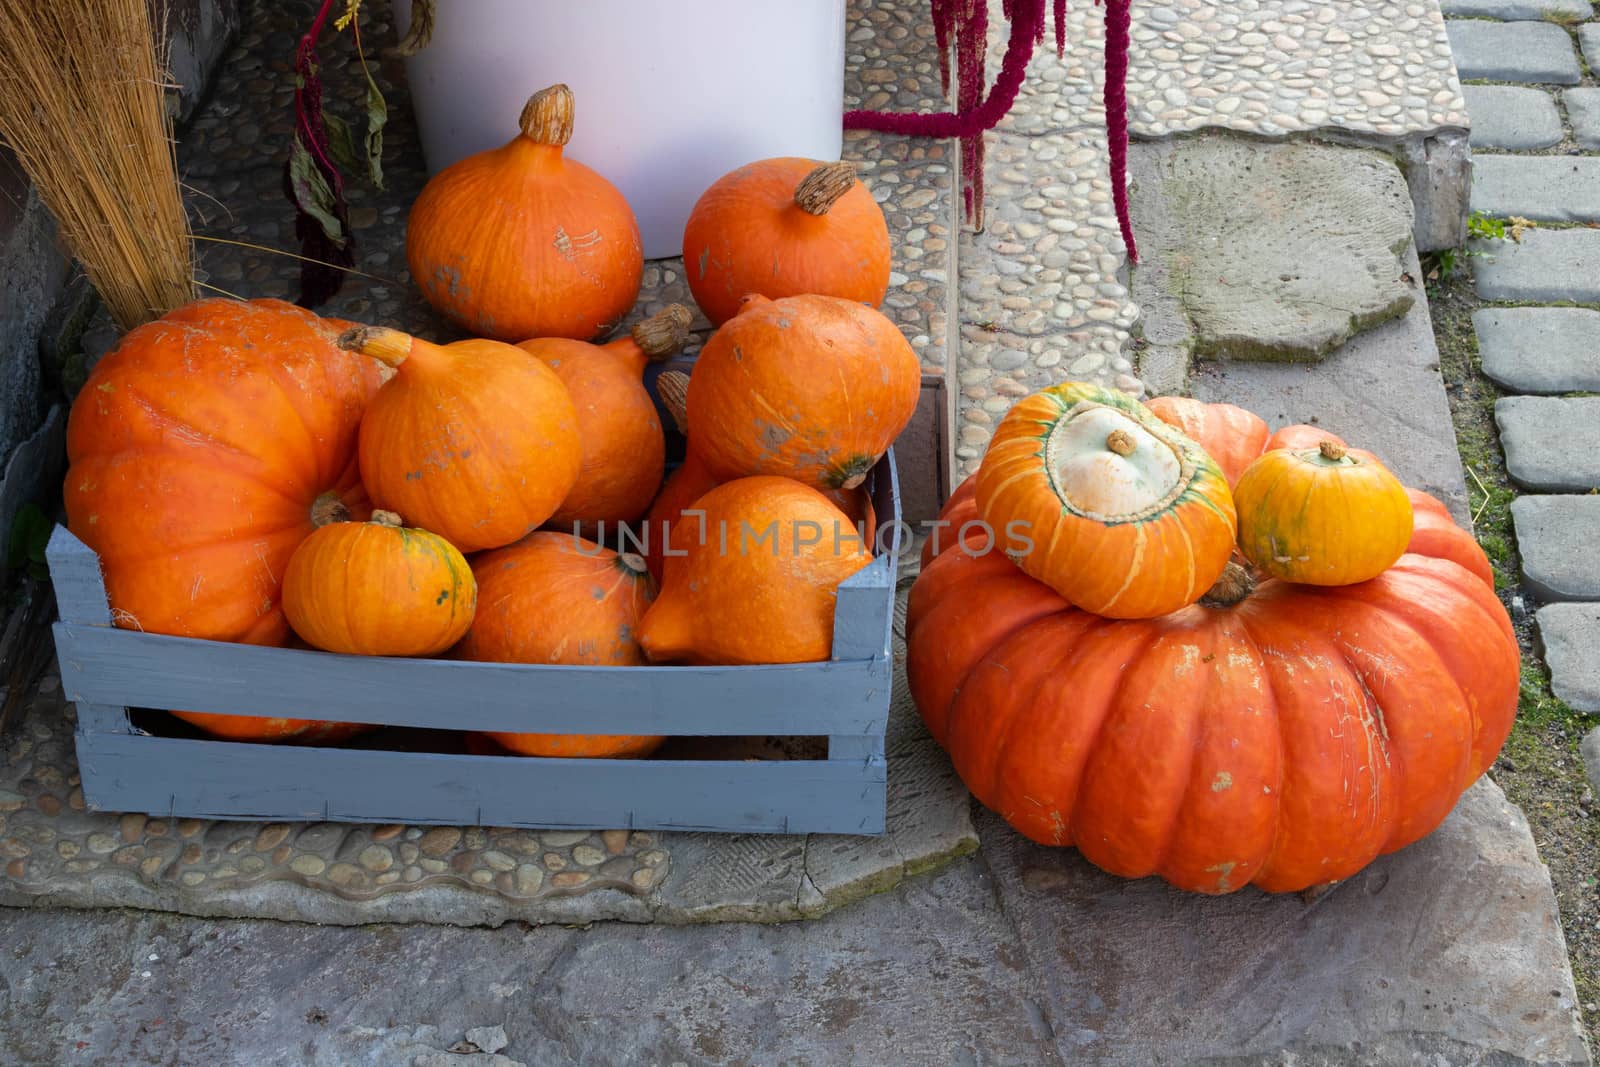 Orange pumpkins of various sizes lie on the porch of the house.The Concept Of Halloween.